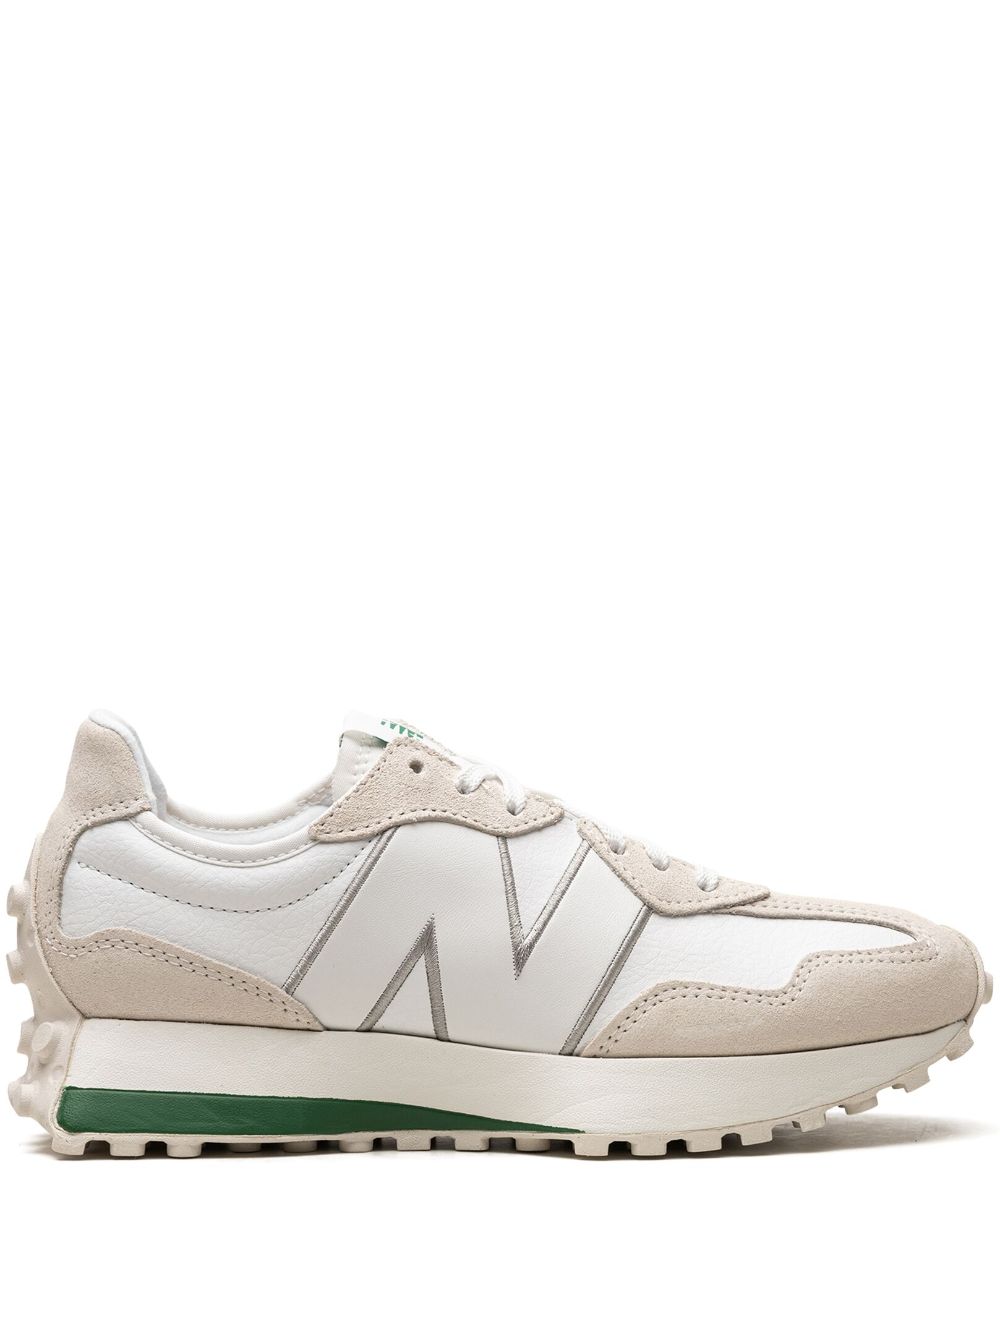 New Balance 327 "White/Succulent Green" sneakers